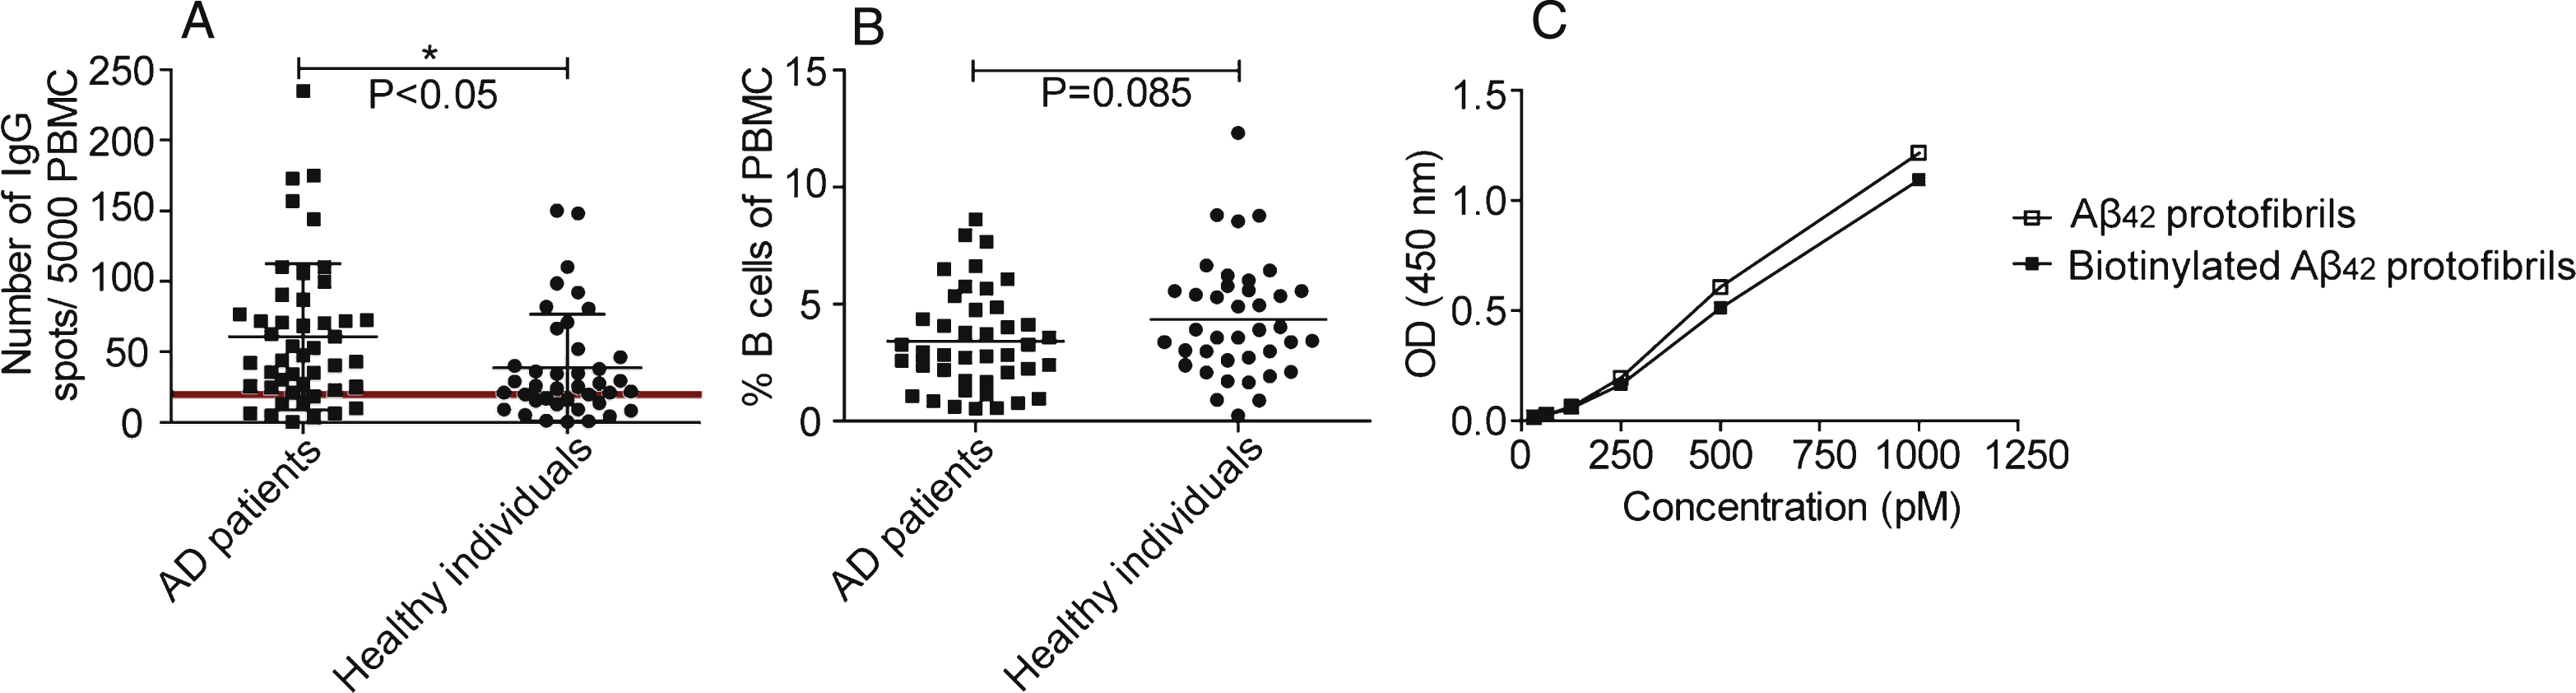 Characterization of PBMCs and validation of the antigen. A) Total IgG production from activated B cells. Number of spots representing IgG producing cells detected in the ELISpot. AD individuals (n = 39) (■) had higher number of spots than healthy controls (n = 30) (•) (p≤0.05). PBMCs from individuals failing activation (spots <20) (AD patients (n = 7), healthy controls (n = 10)) were excluded from the study (below horizontal line). B) B cell levels in AD patients and healthy individuals. The proportion of B cells in PBMCs was defined with flow cytometry by determining the number of CD19+ cells. There was no significant difference in the percentage of B cell in AD patients compared to healthy controls (p = 0.085). C) Aβ42 protofibril evaluation with protofibril specific ELISA. No considerable difference was noticed comparing biotinylated Aβ42 protofibrils with non-biotinylated Aβ42 protofibrils.